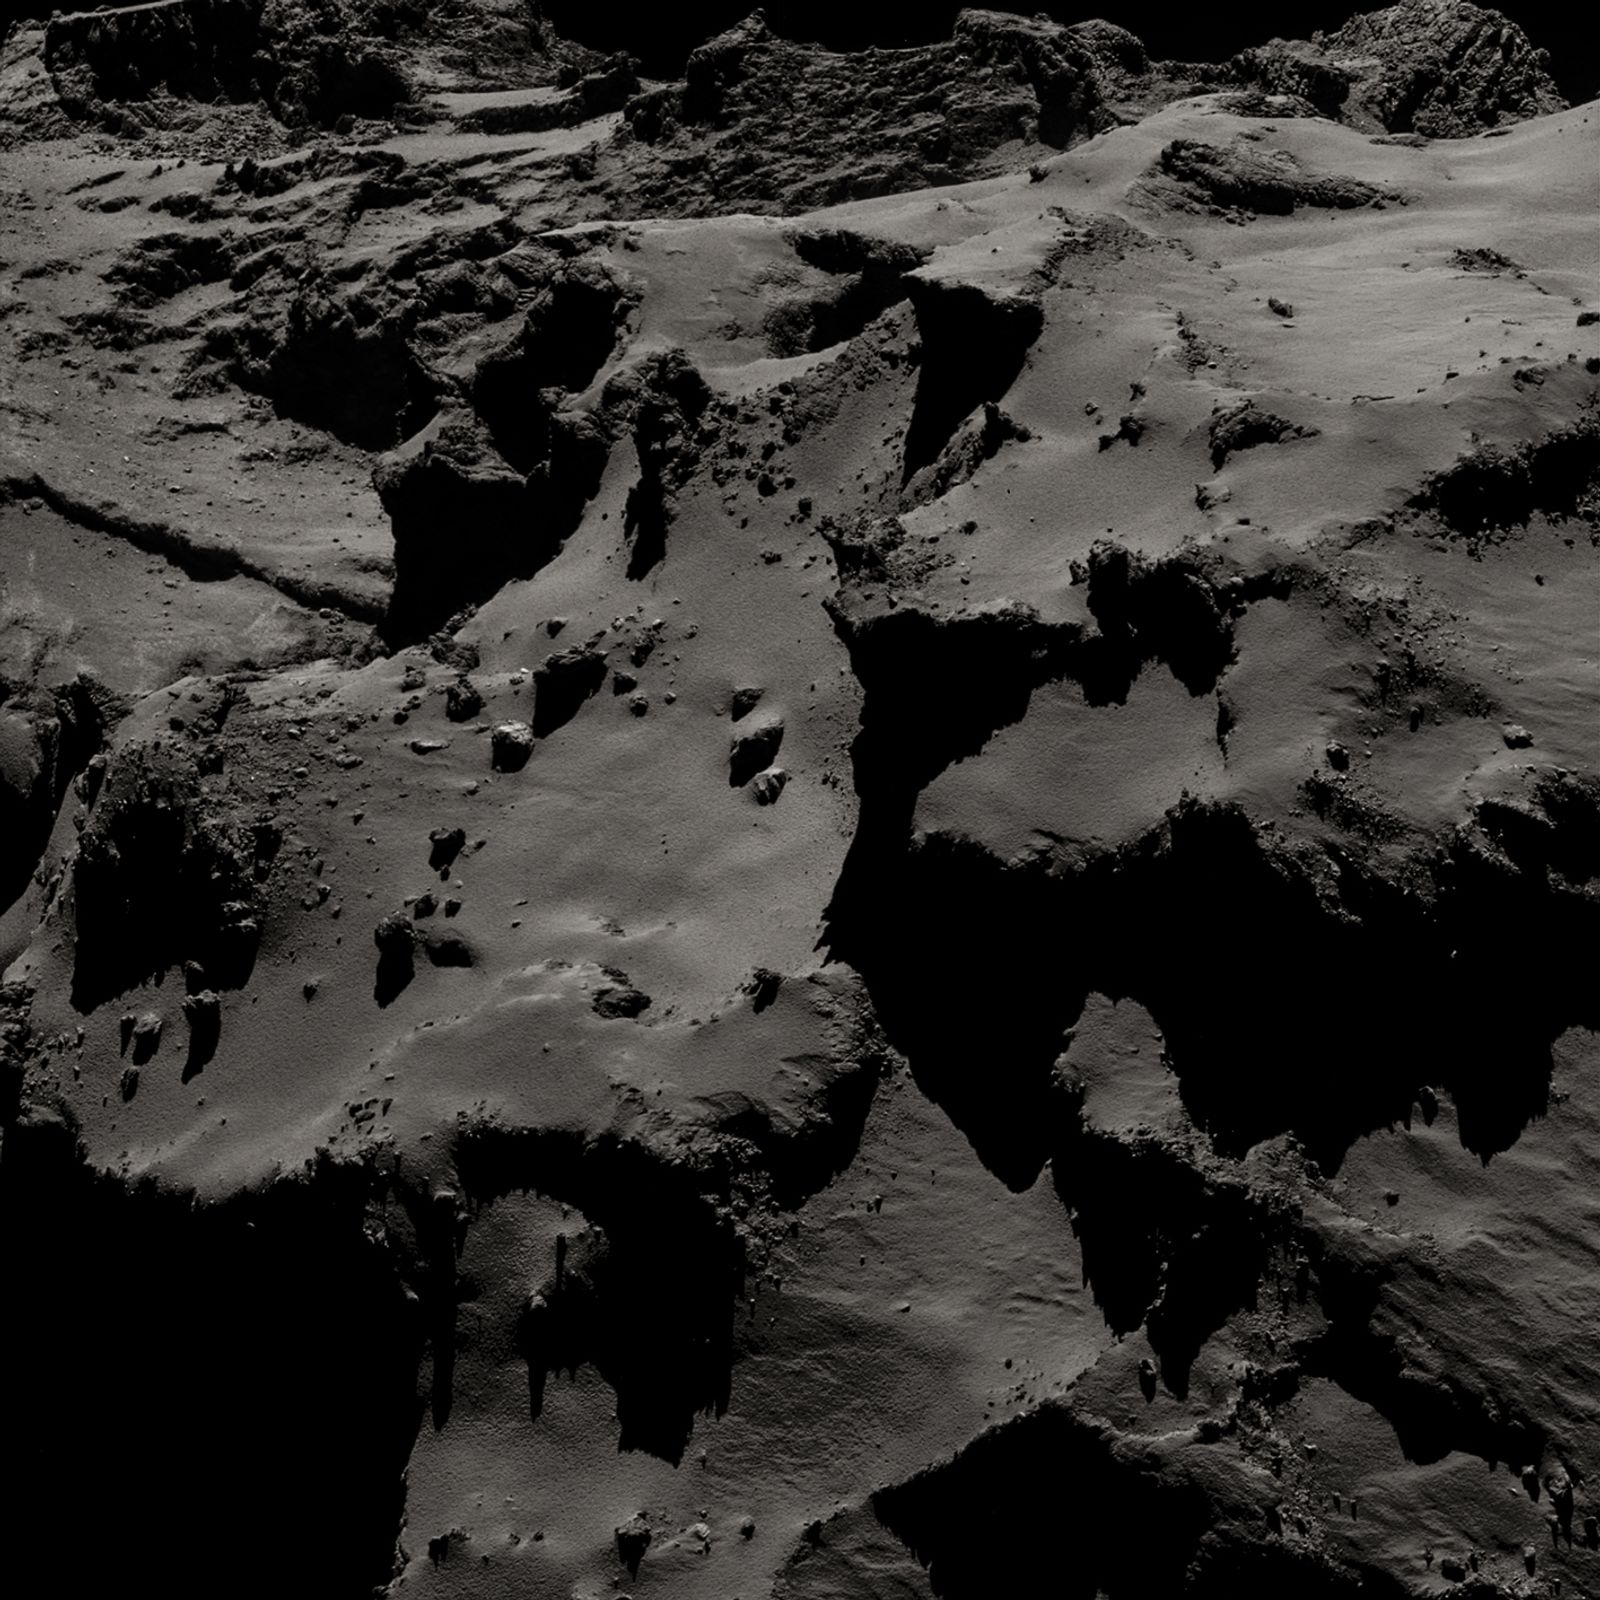 Photographs from Rosetta’s 10-Year Journey through Deep Space